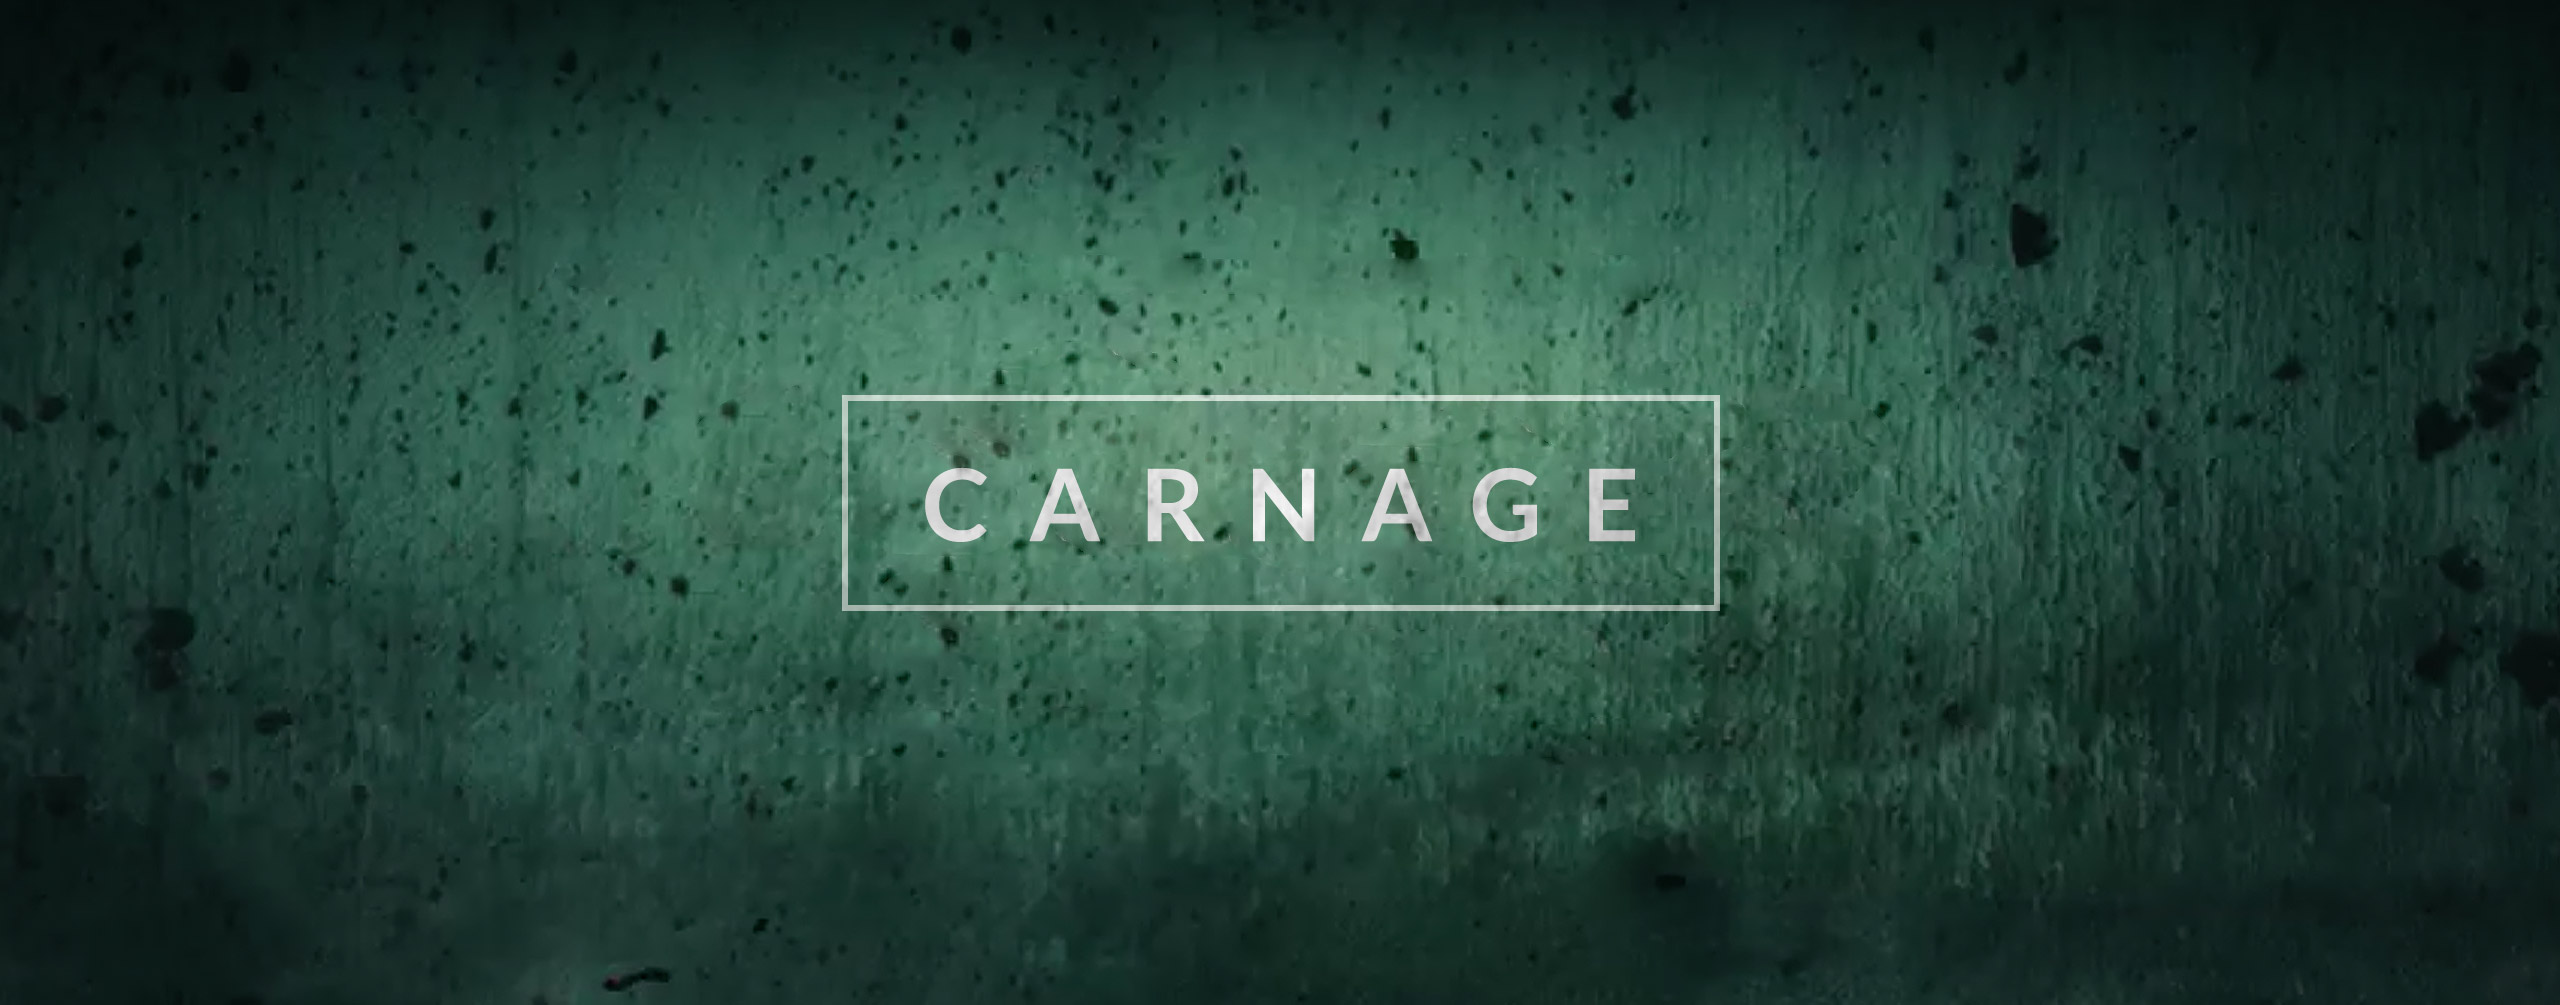 Carnage - Blood Effects